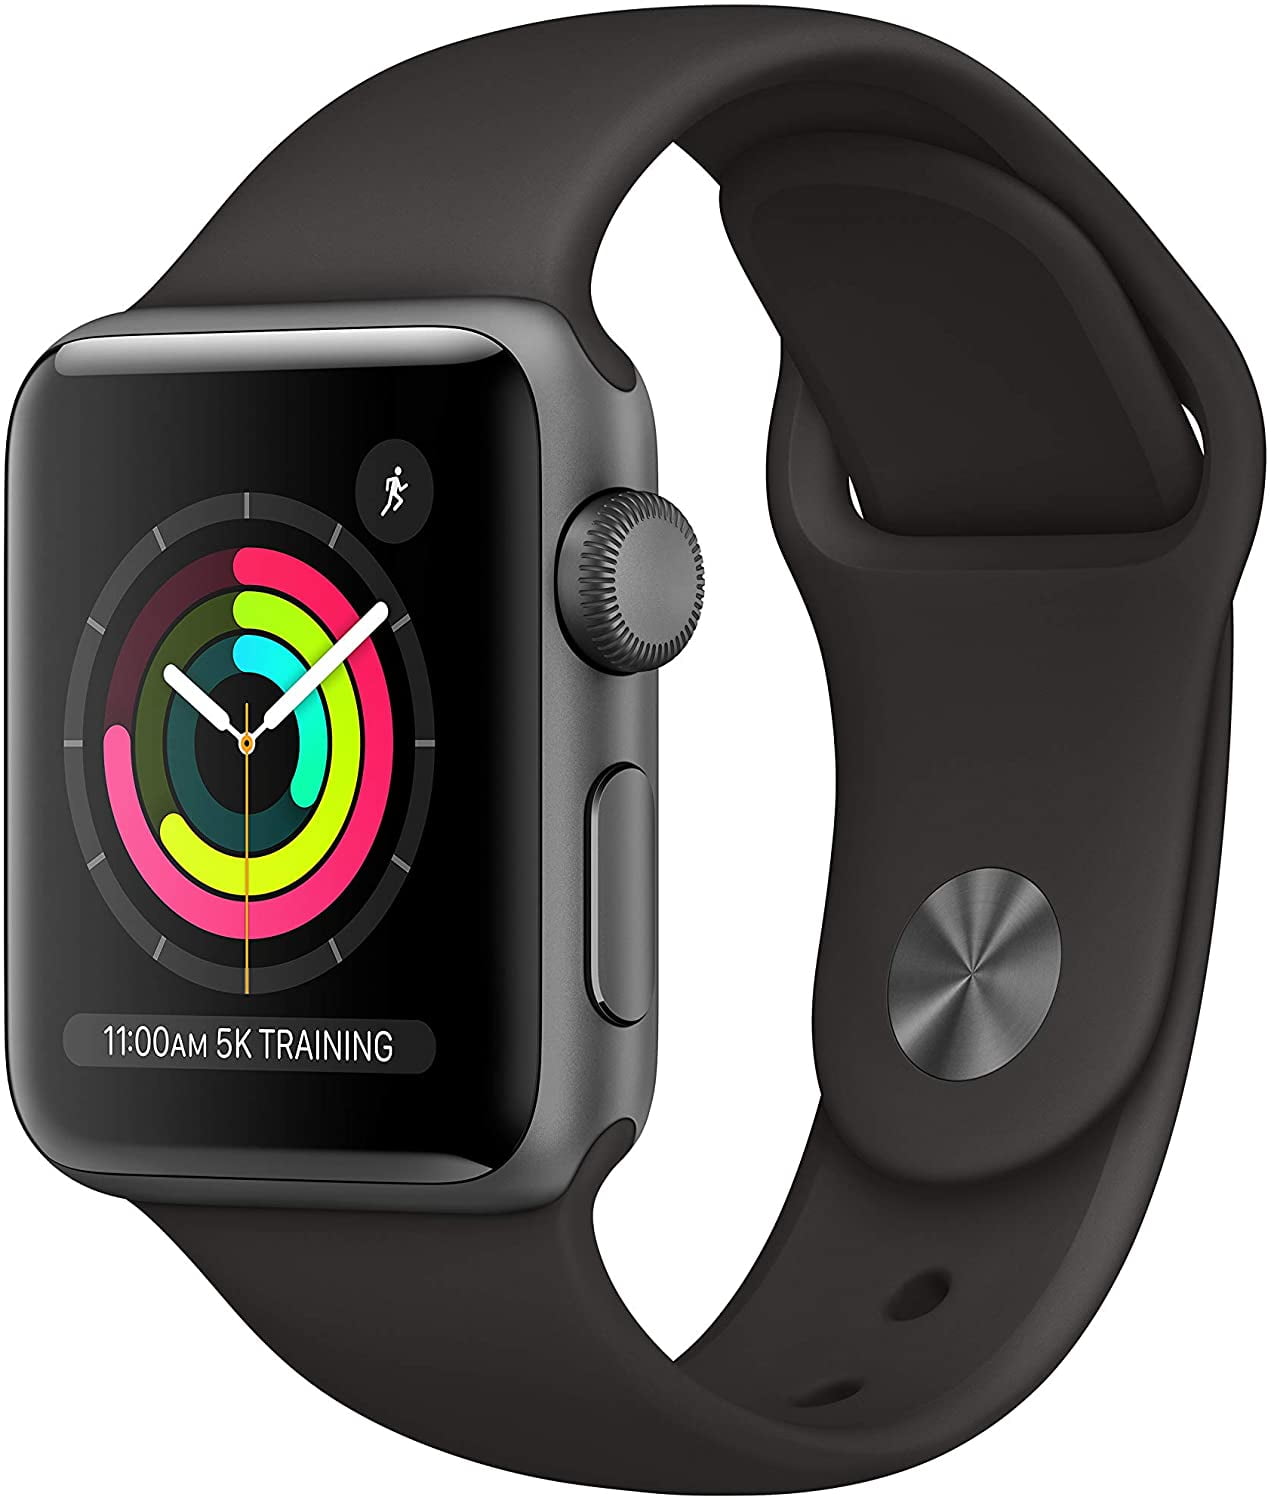 Apple Watch Series 3 - 38MM - GPS Only - Space Gray - Aluminum